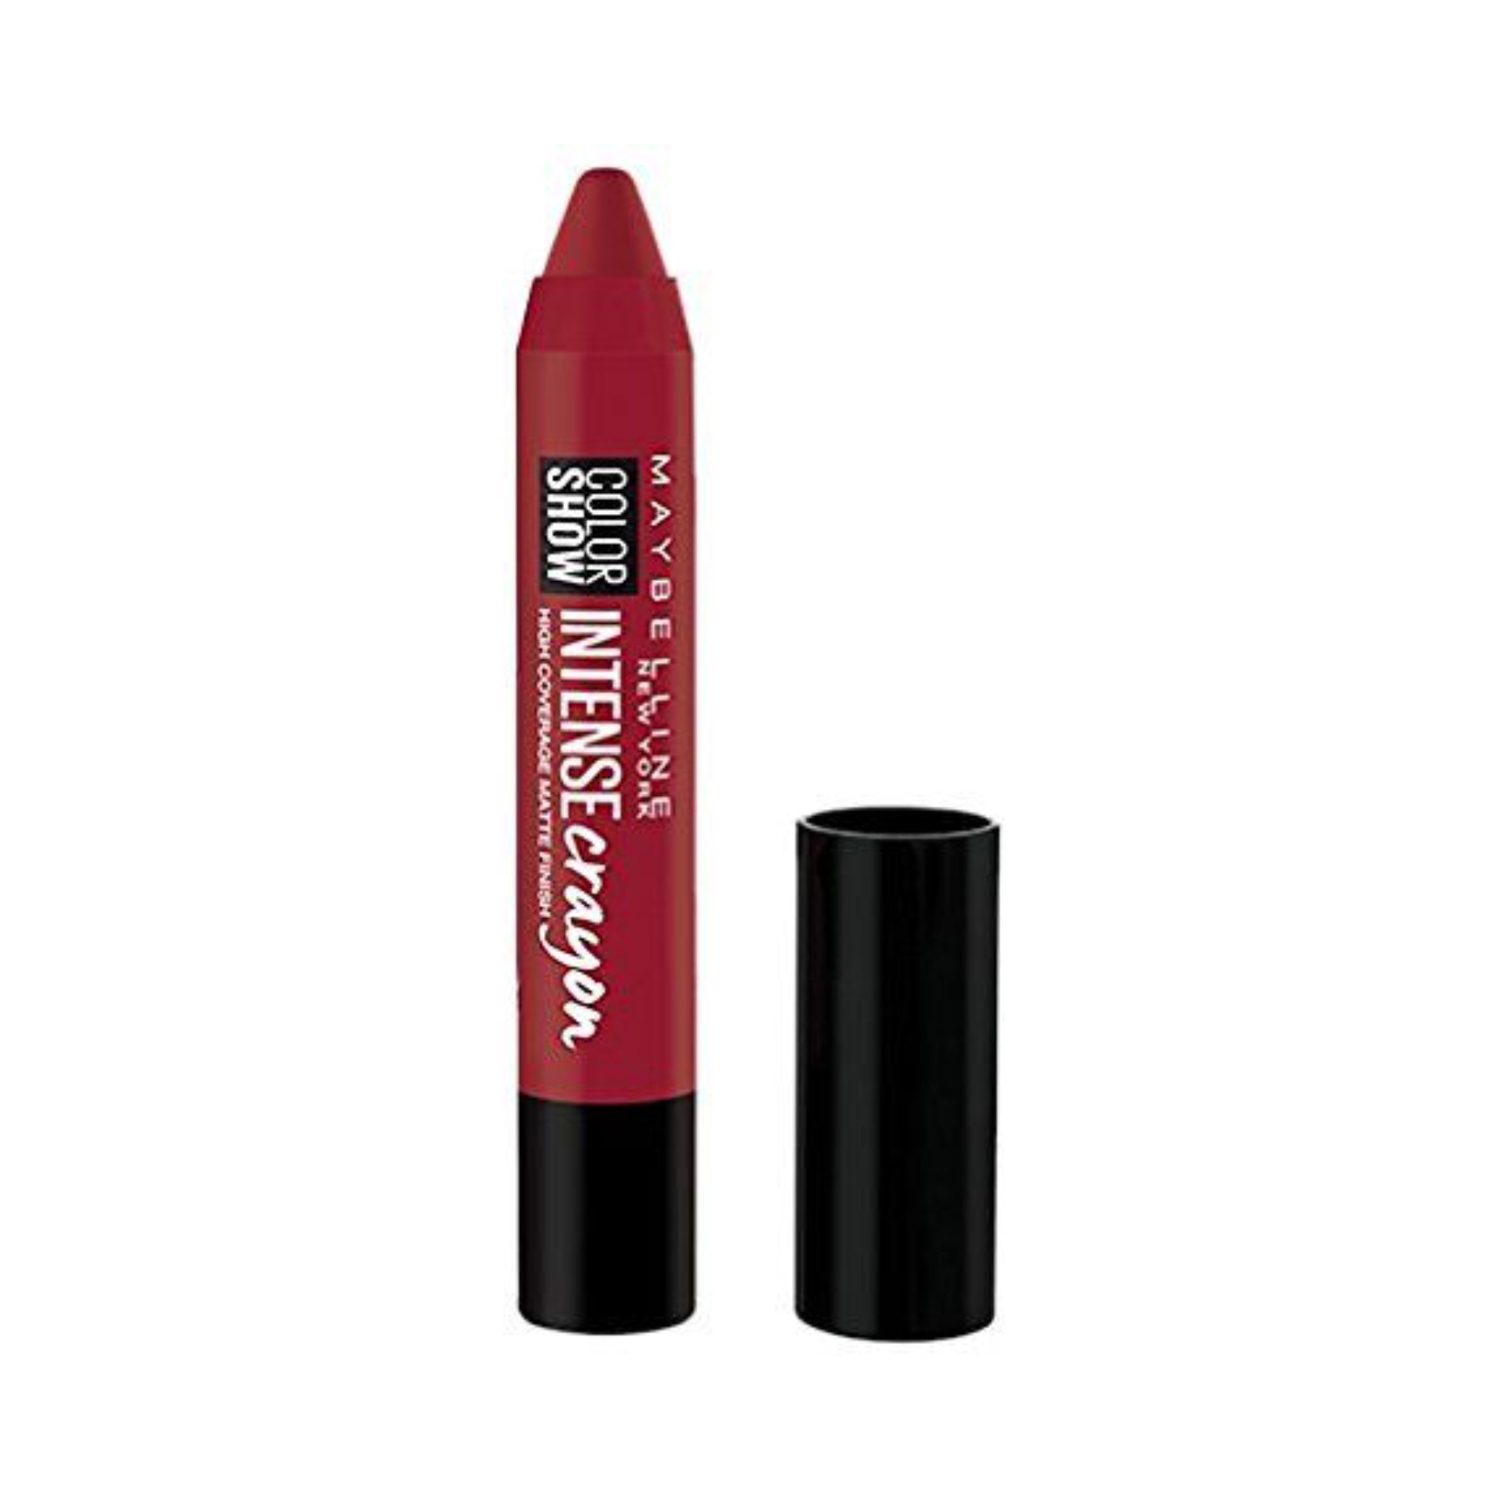 Maybelline New York | Maybelline New York Color Show Intense Lip Crayon SPF 17 - Intense Red (3.5g)